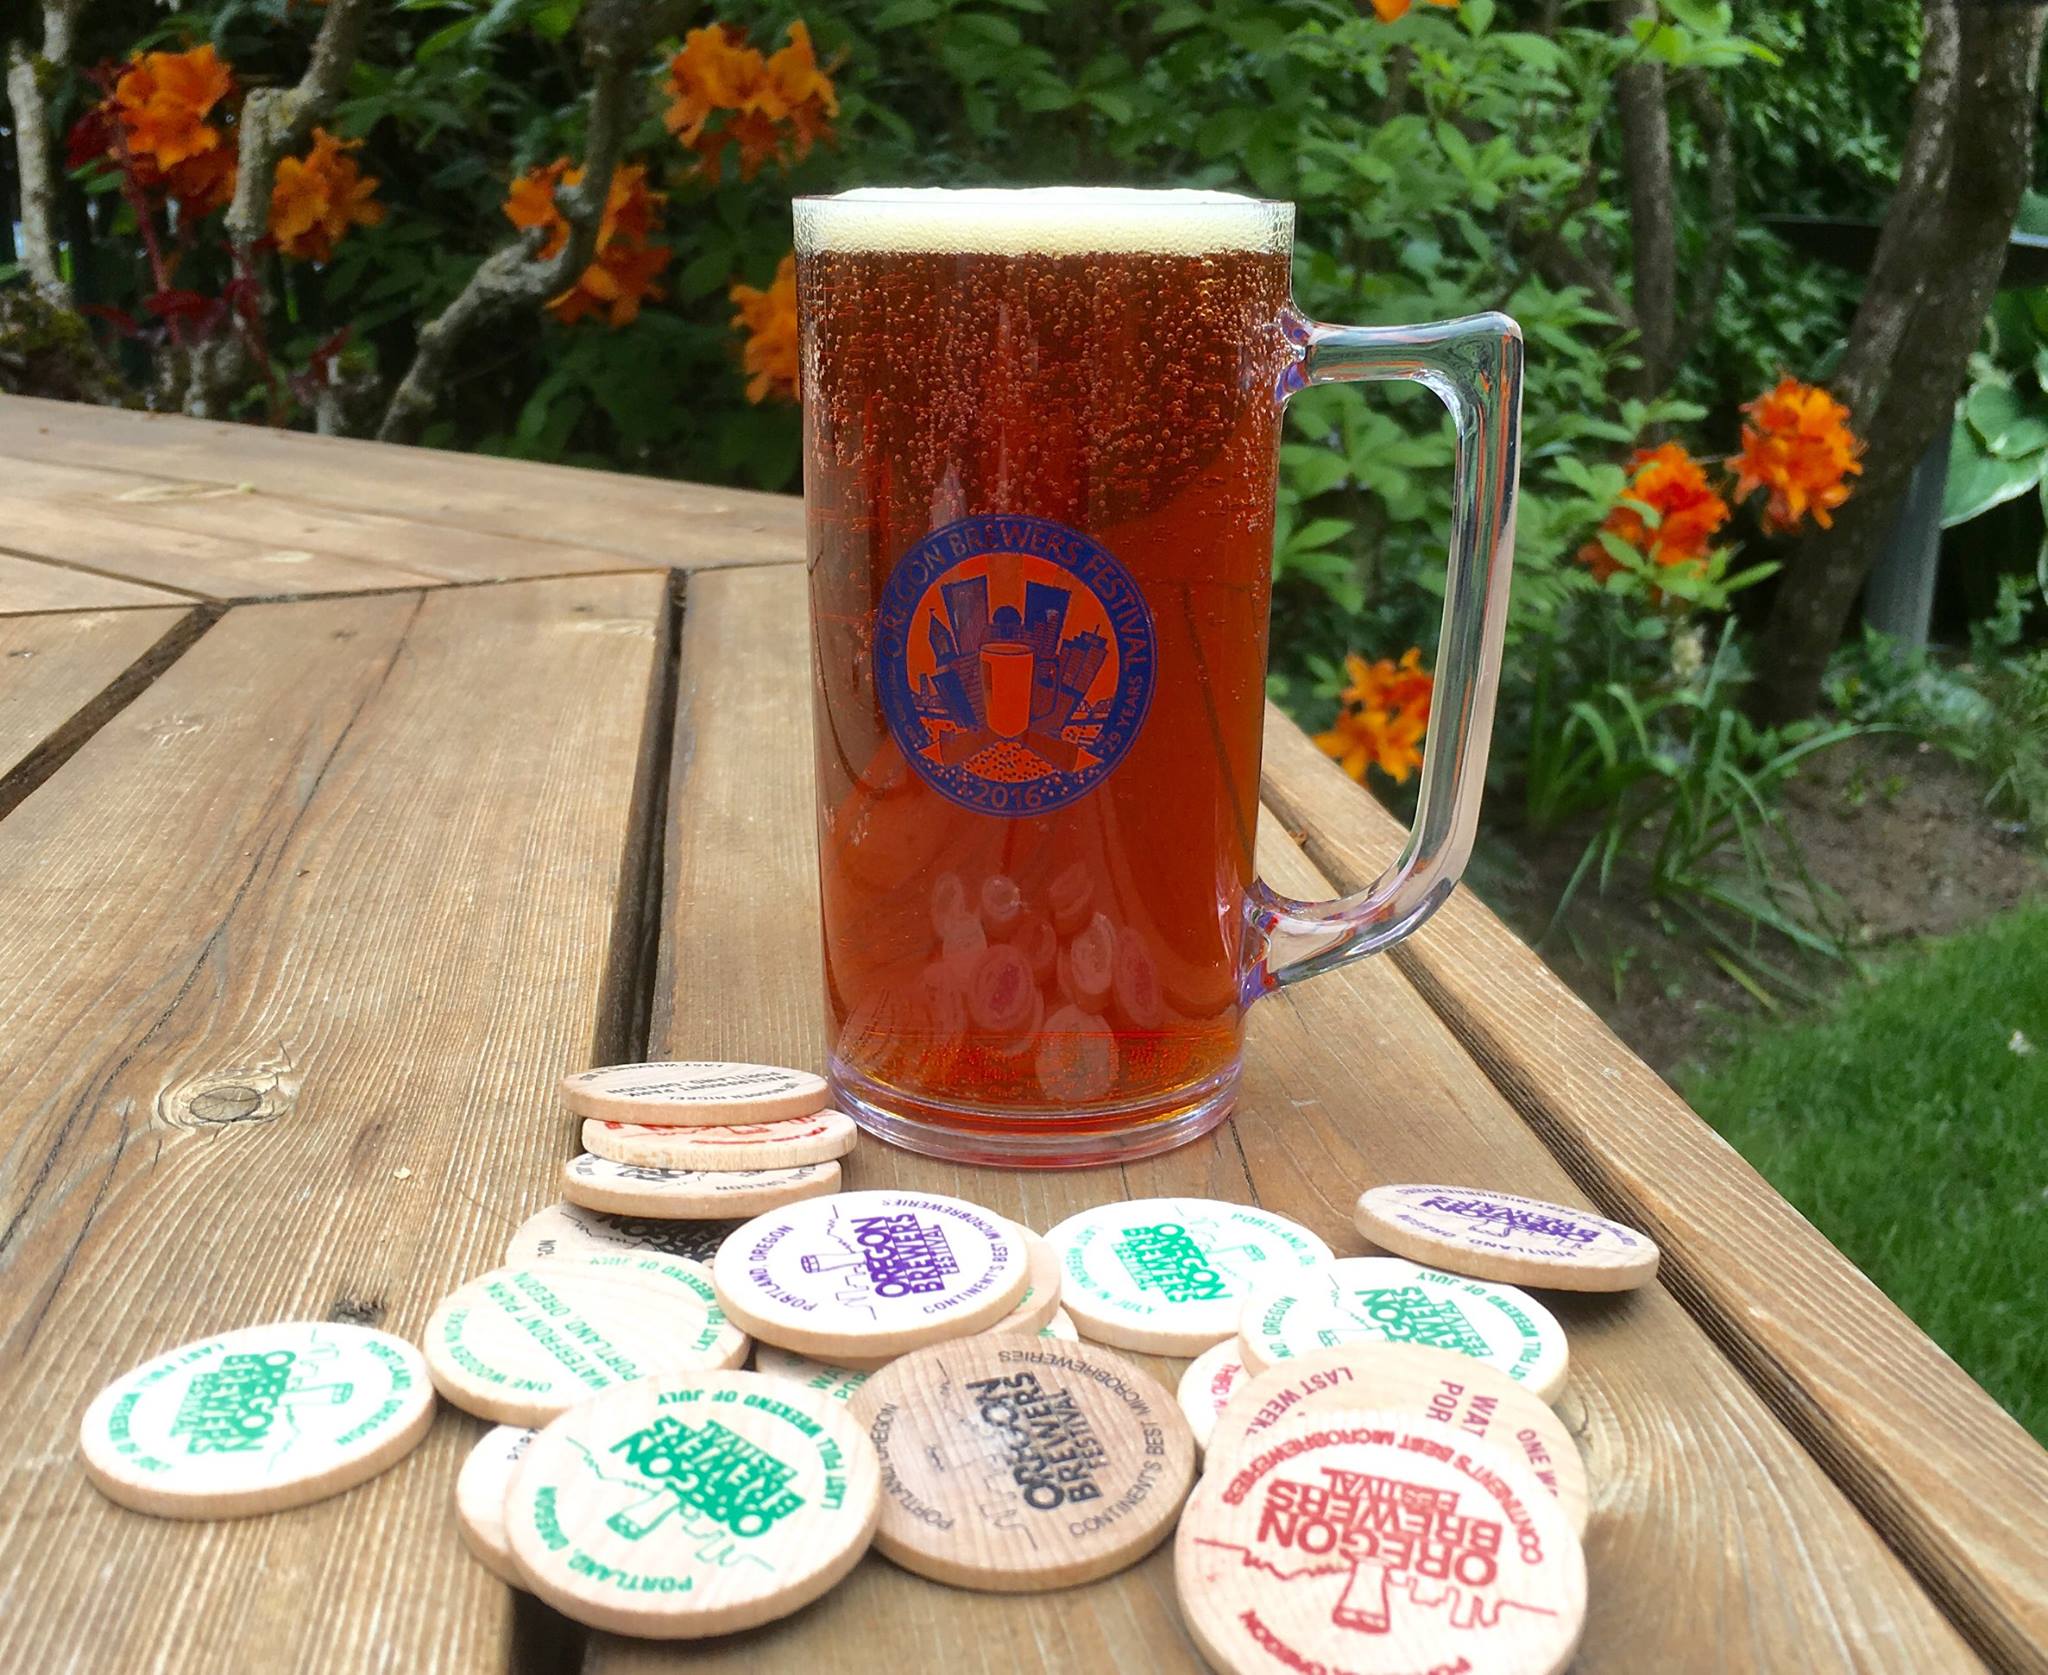 For 2016, the Oregon Brewers Festival will use a 12 oz. clear styrene plastic, free of BPA and phthalates mug. (image courtesy of the Oregon Brewers Festival)